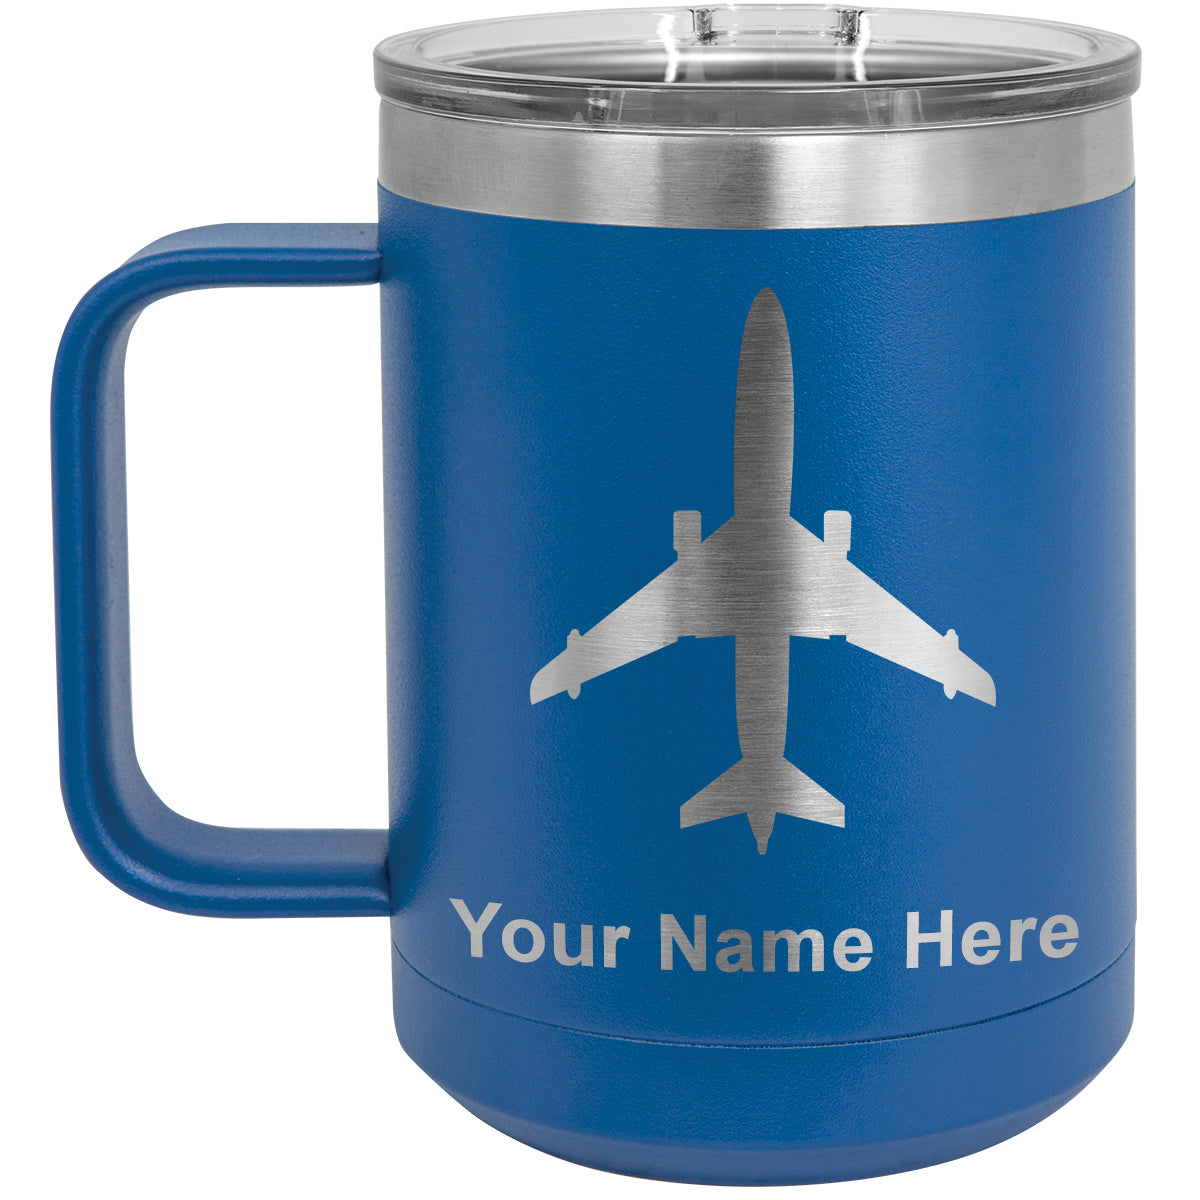 15oz Vacuum Insulated Coffee Mug, Jet Airplane, Personalized Engraving Included